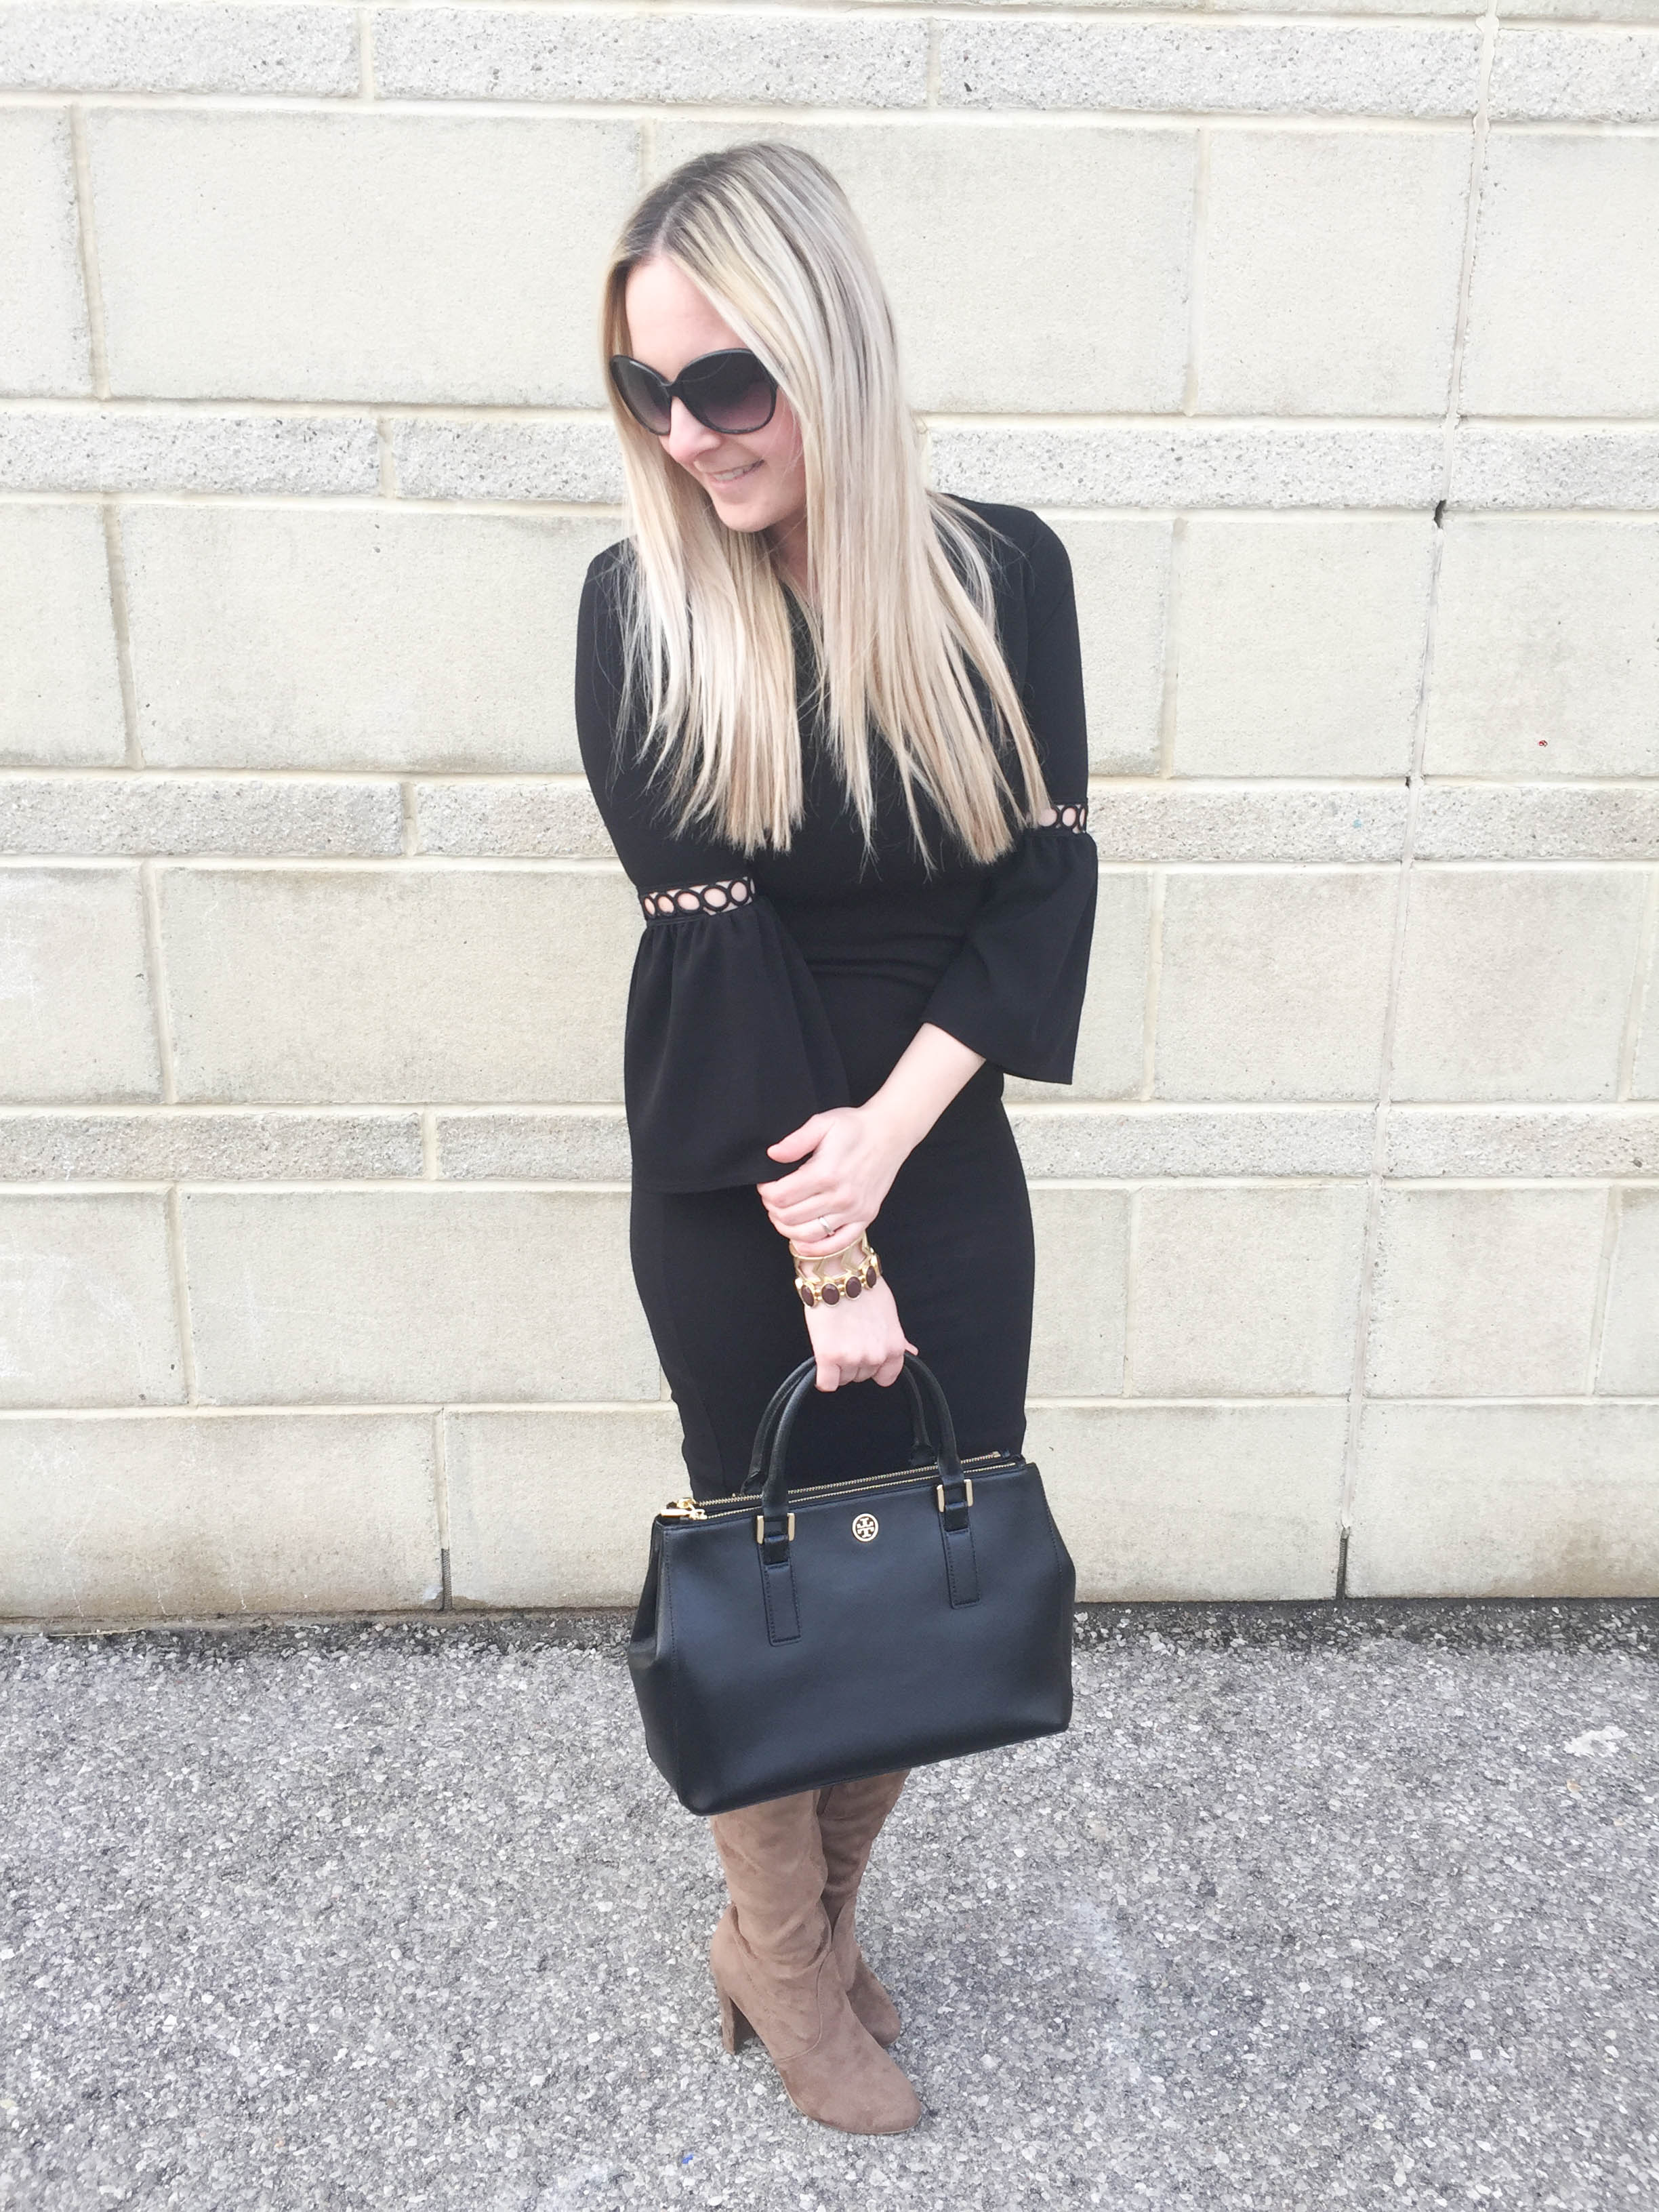 Pink Blush Black Dress on Livin' Life with Style 